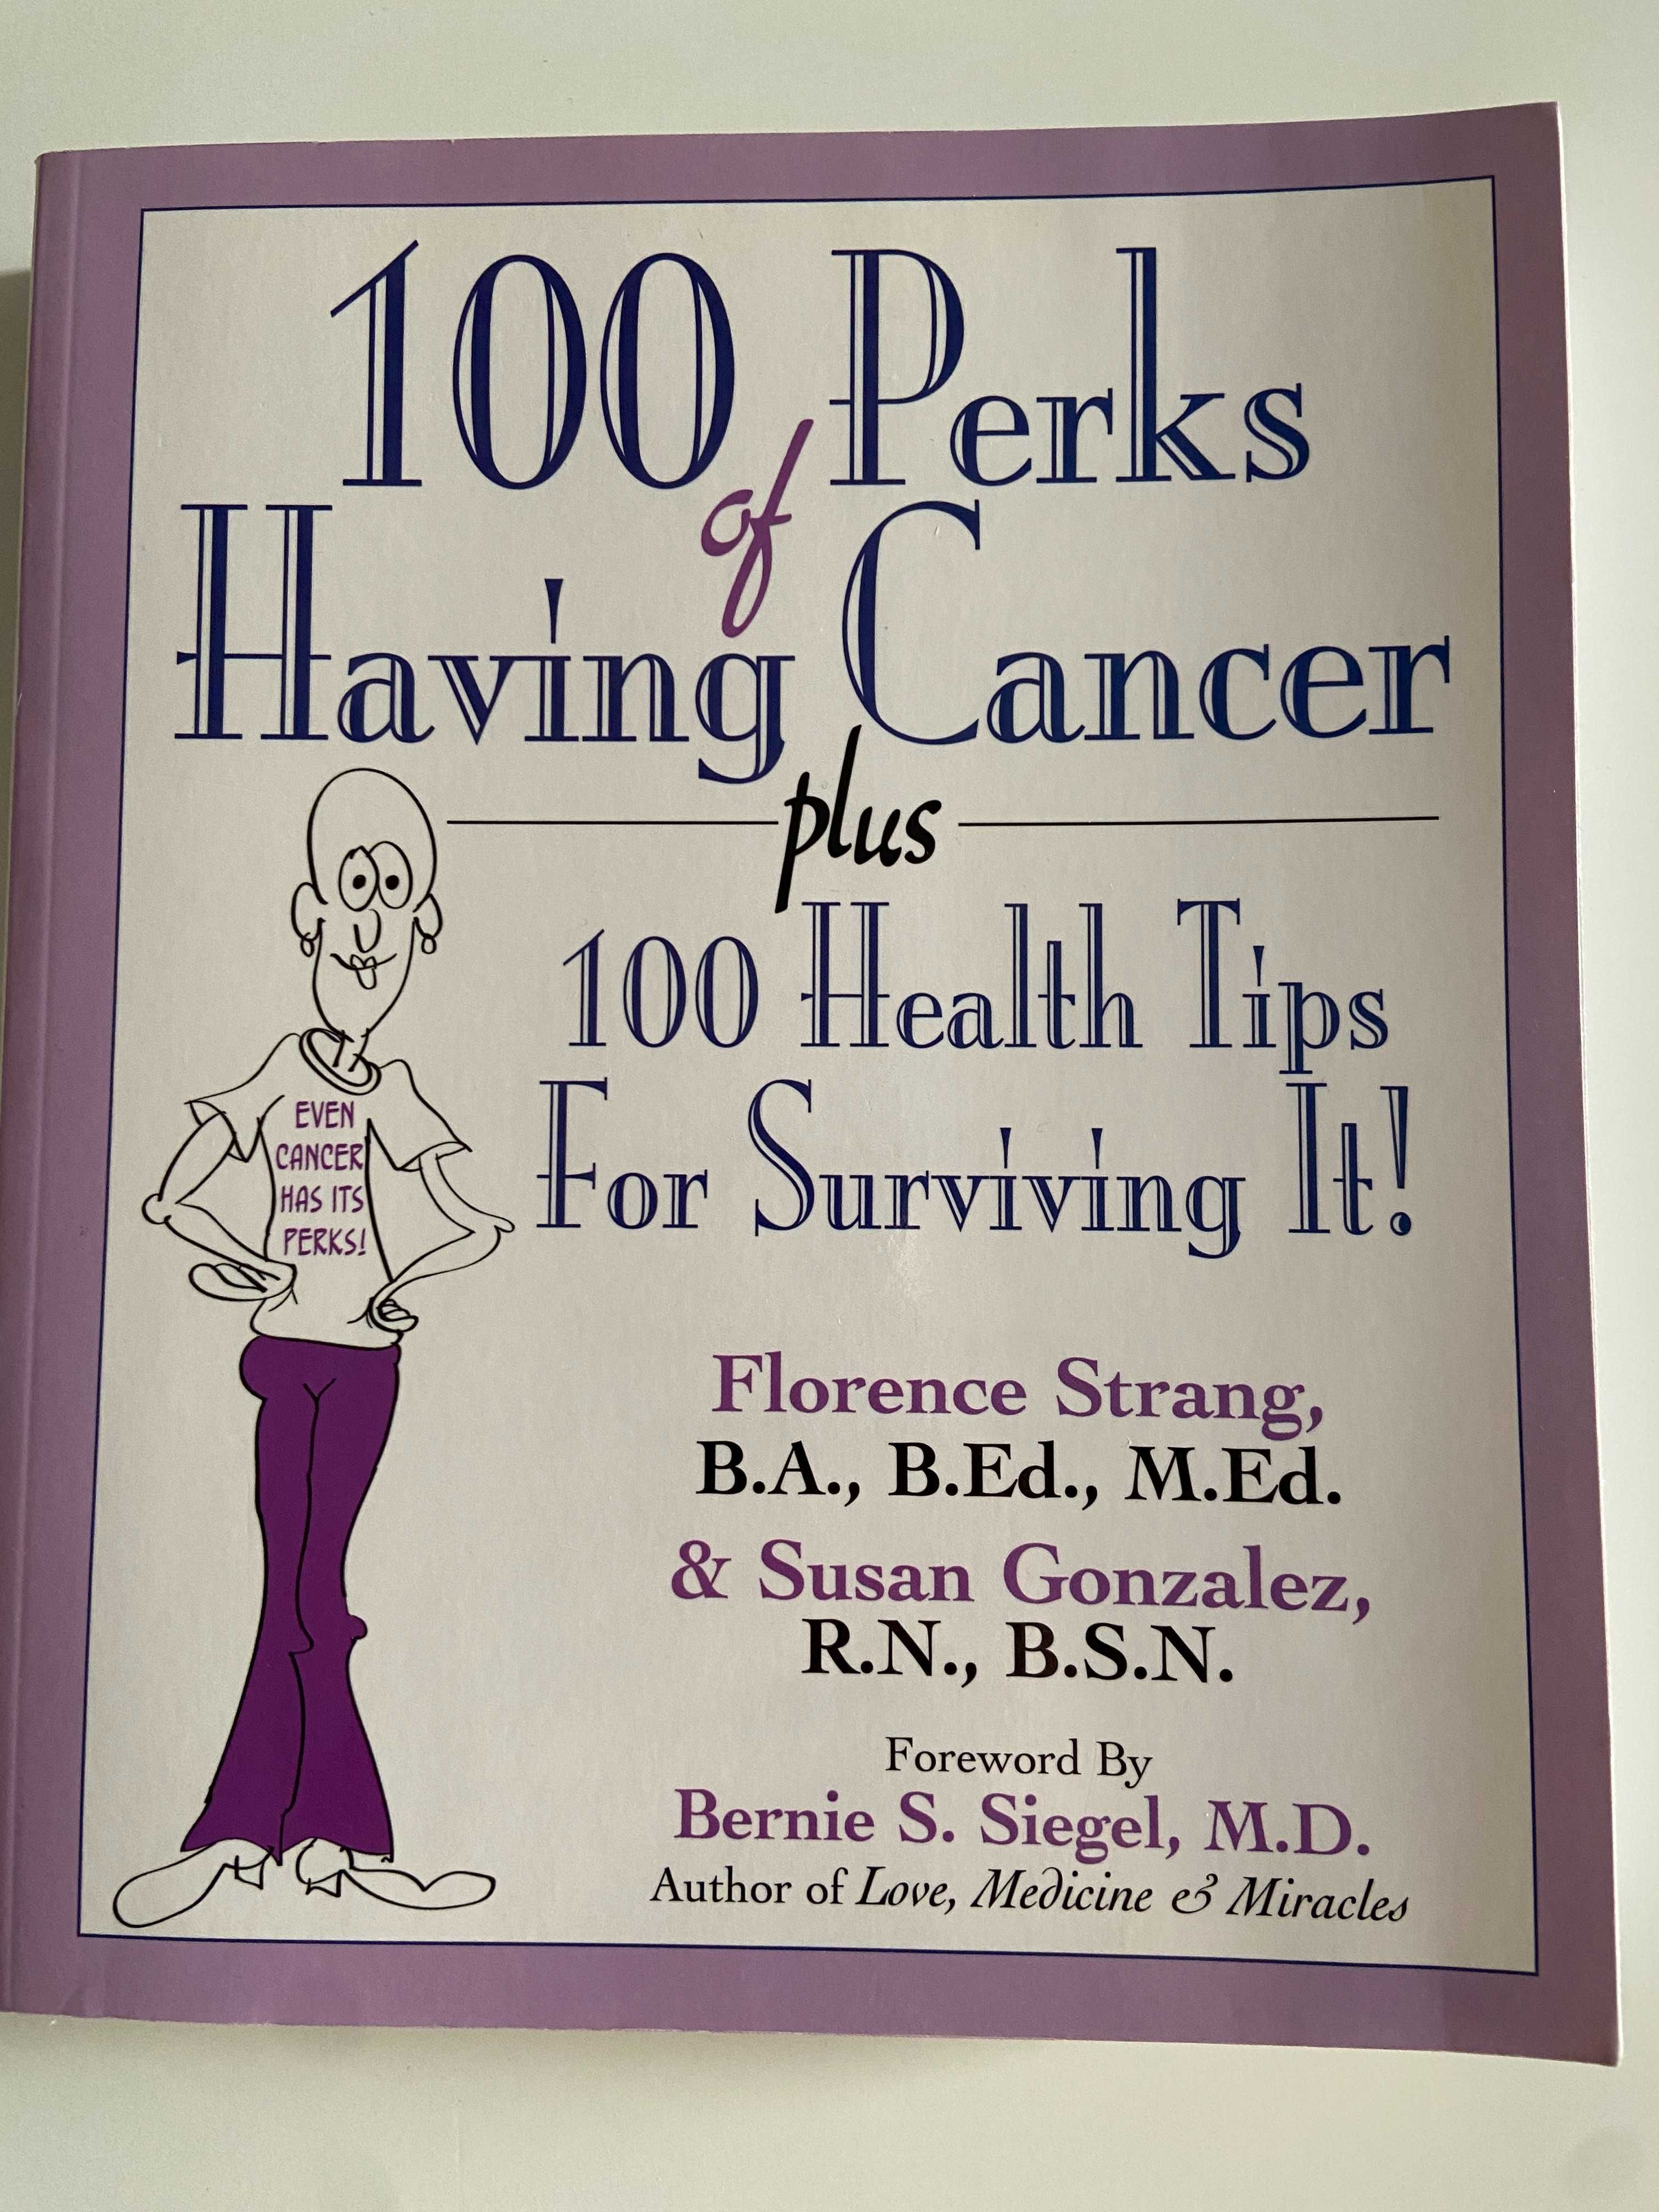 100 Perks of Having Cancer: Plus 100 Health Tips for Surviving It!